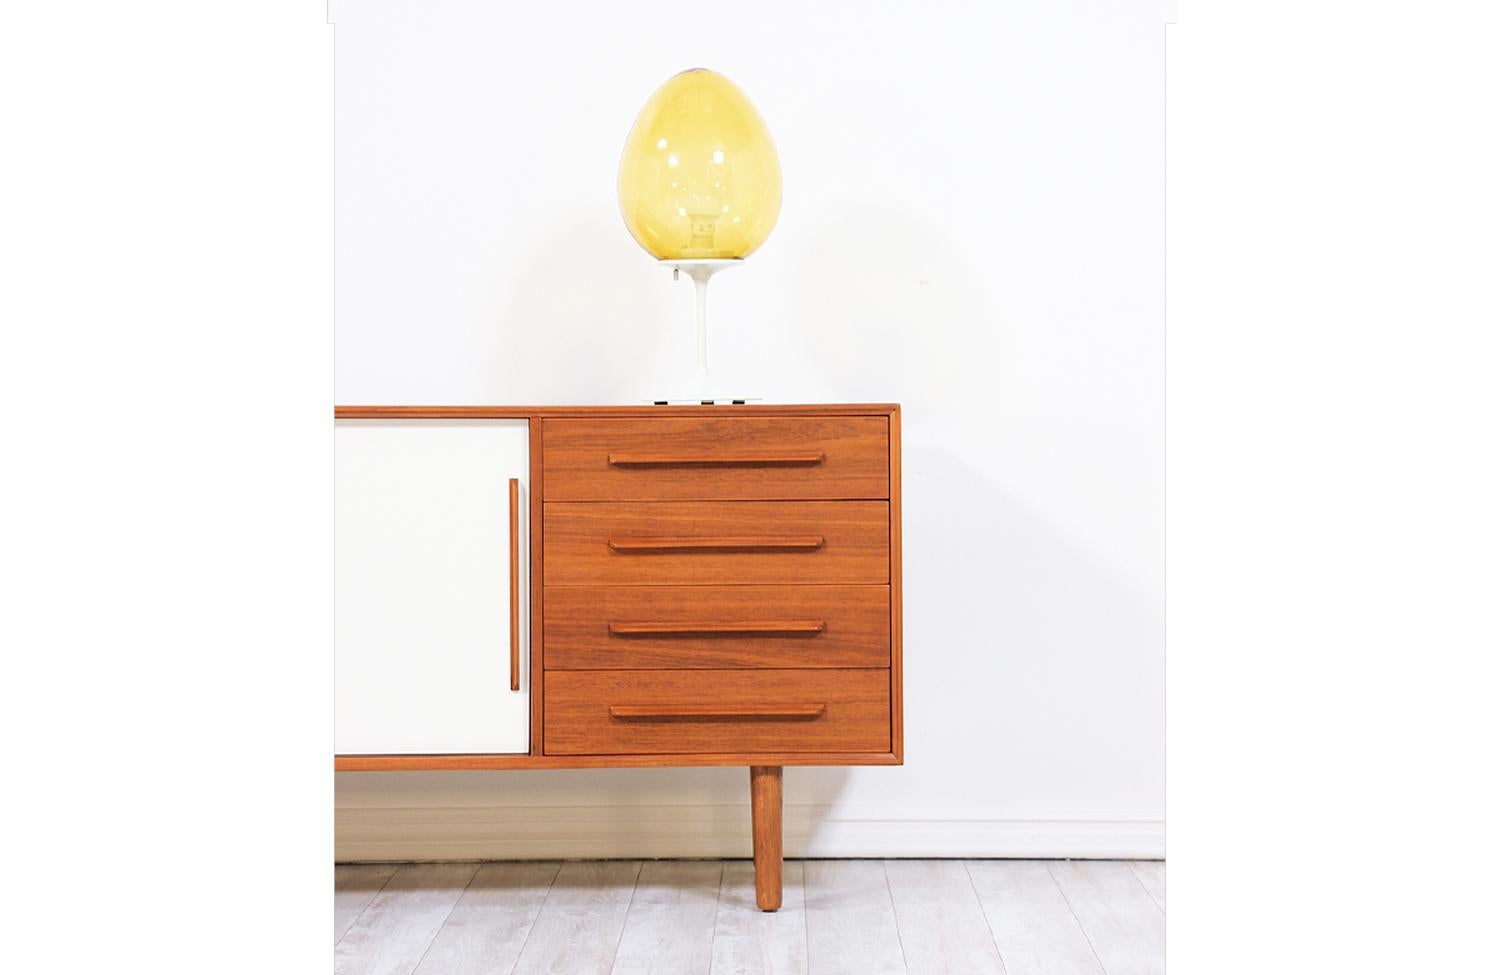 American Bill Curry 'Stemlite' Table Lamp for Design Line